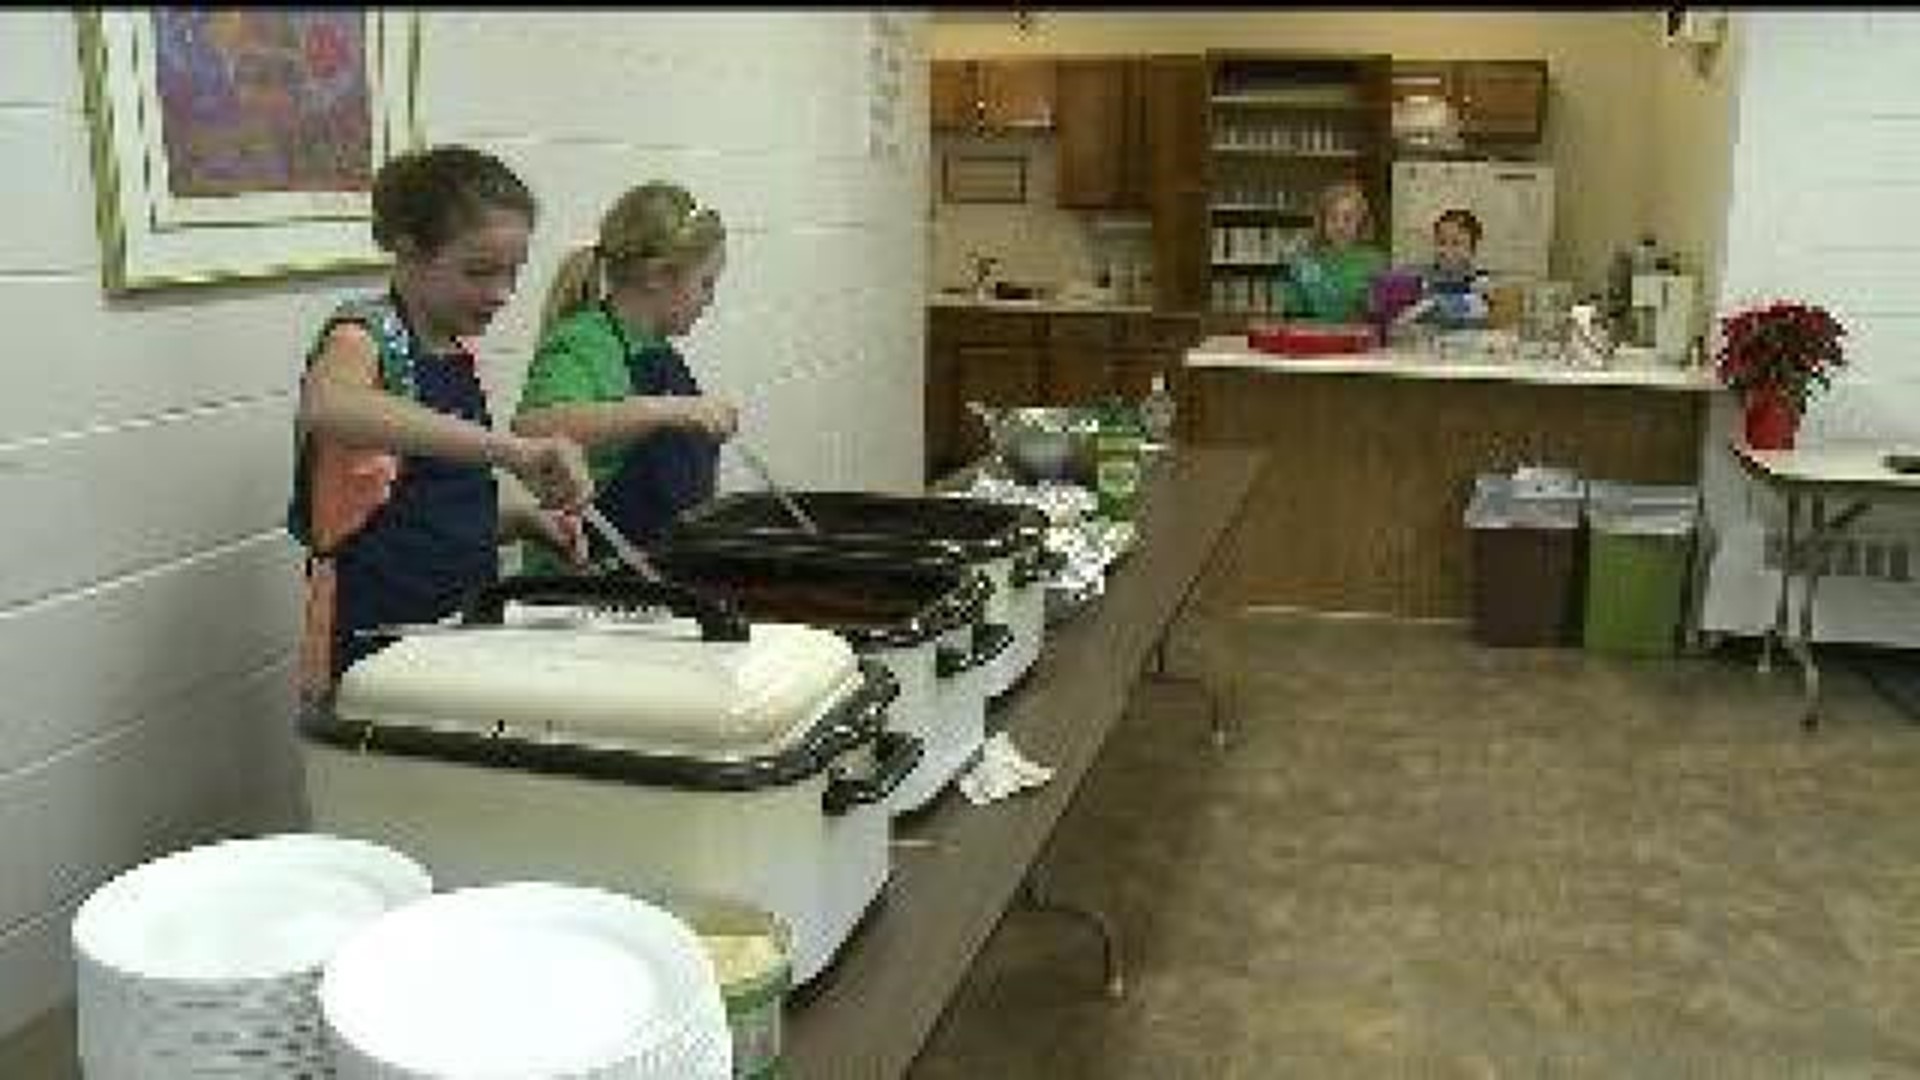 Girl Scouts organize spaghetti luncheon to help local food pantry